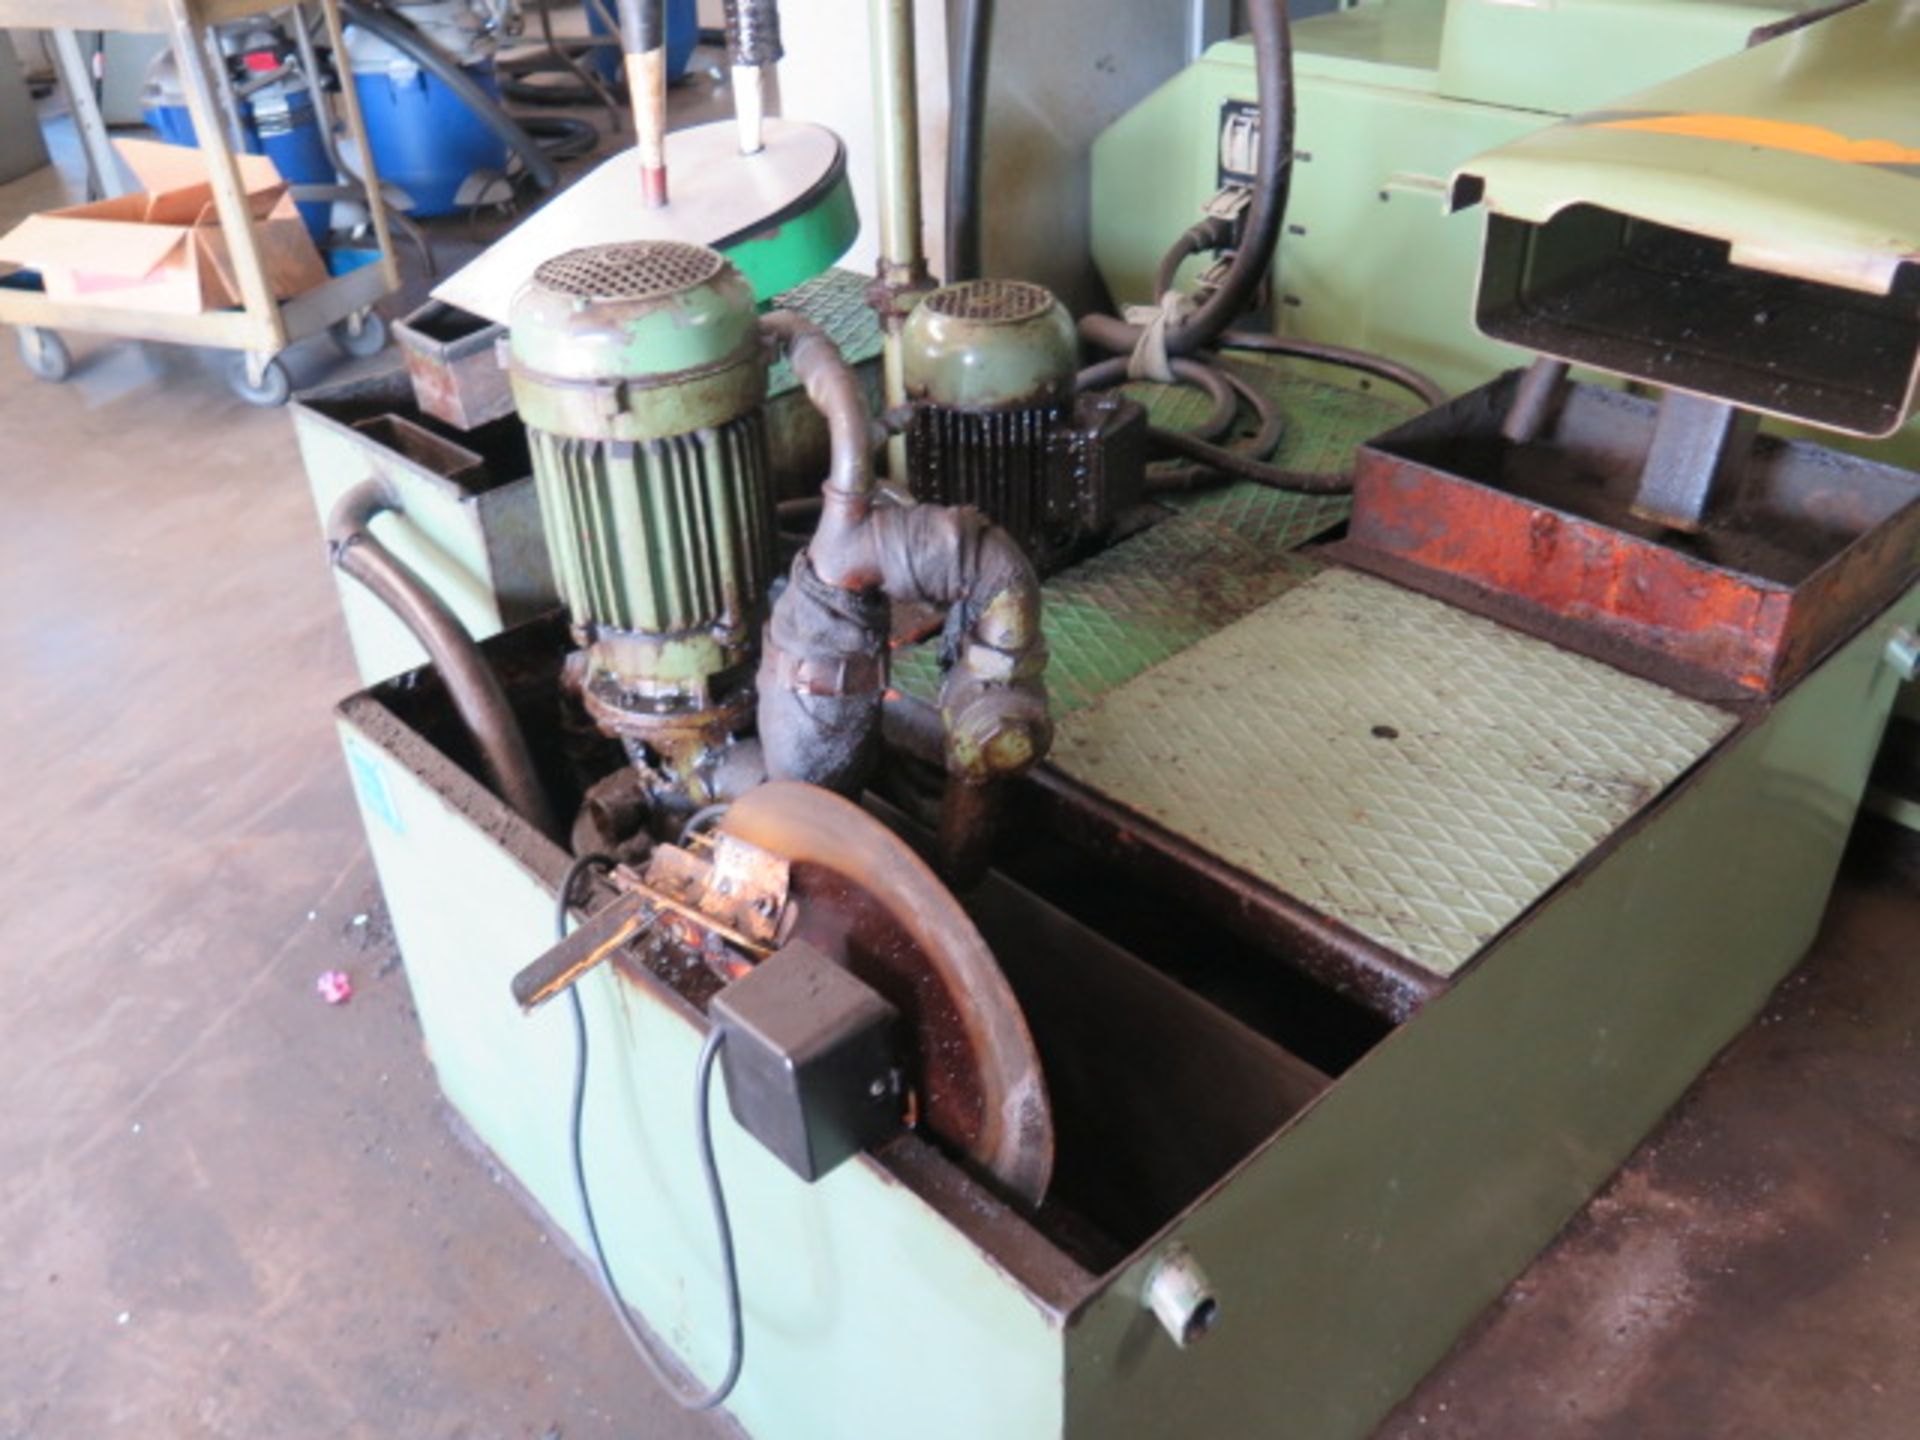 Magerle Type FP-10-S1 10" x 40" Auto Hydr Surface Grinder s/n 965 w/ Magerle Controls, SOLD AS IS - Image 18 of 22